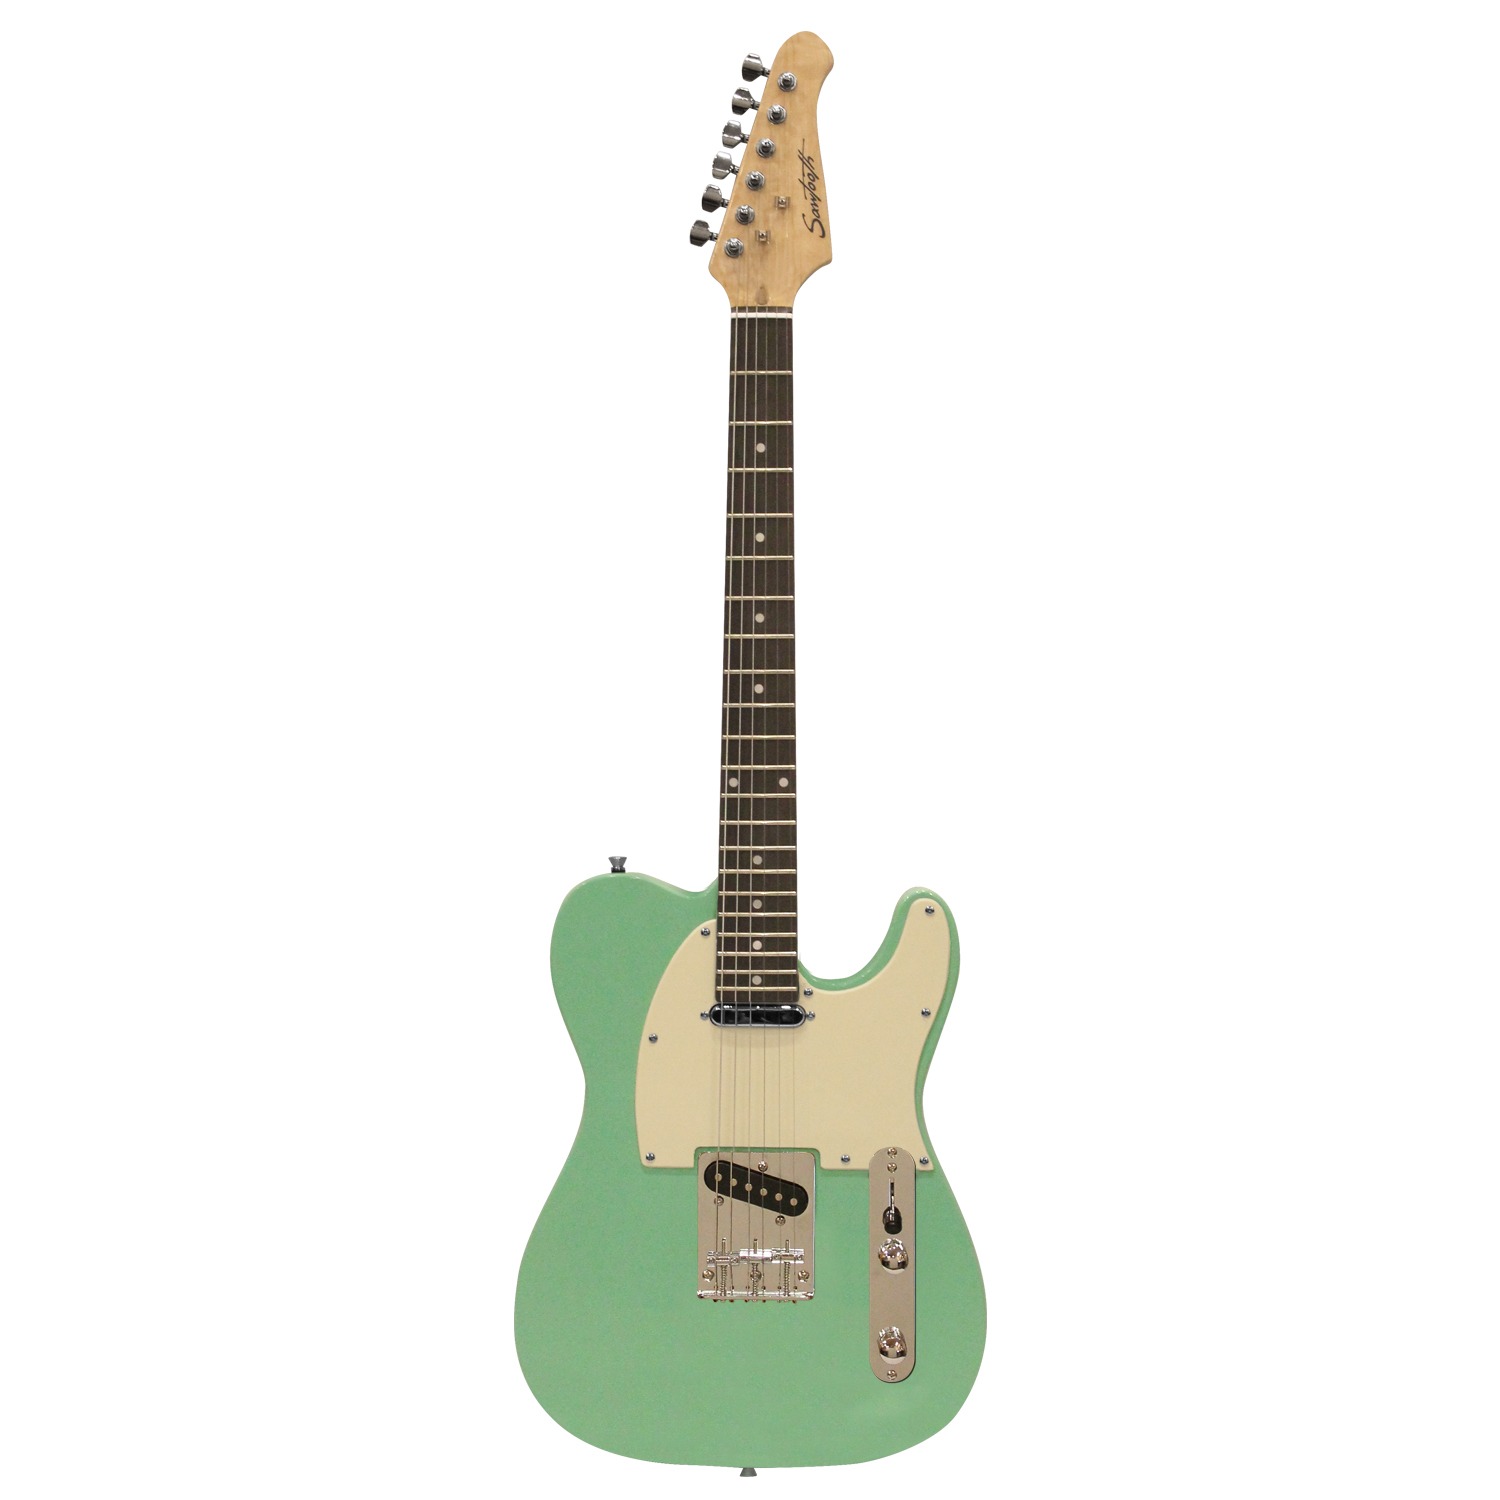 Sawtooth Surf Green ET Series Electric Guitar with Aged White Pickguard  Includes: Gig Bag, Amp, Picks, Tuner, Strap, Stand, Cable, and Guitar  Instructional